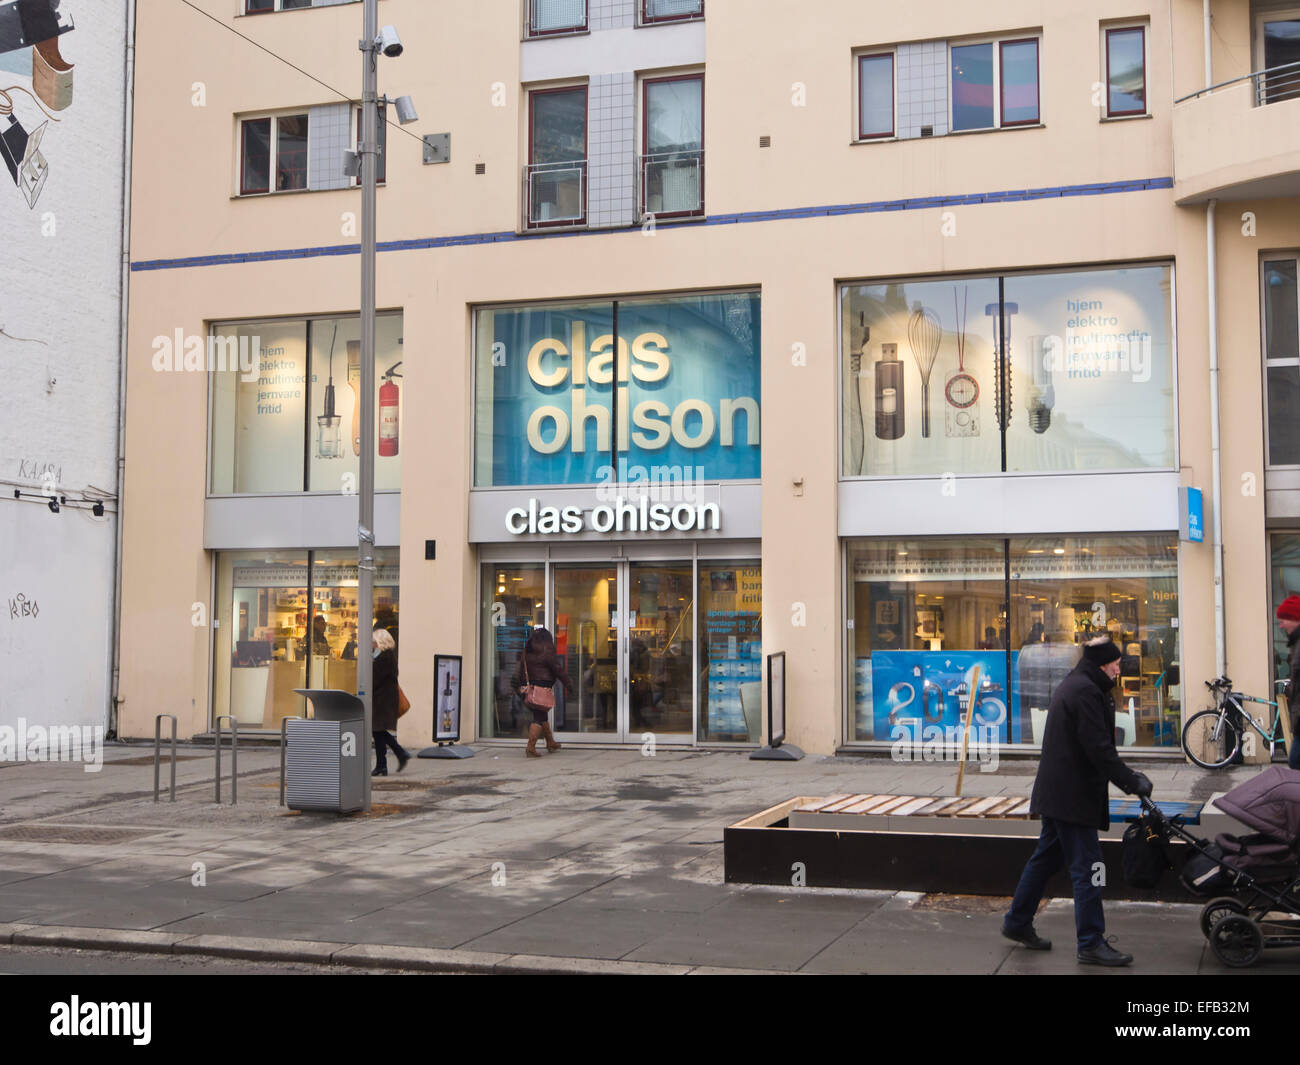 Clas Ohlson American Express